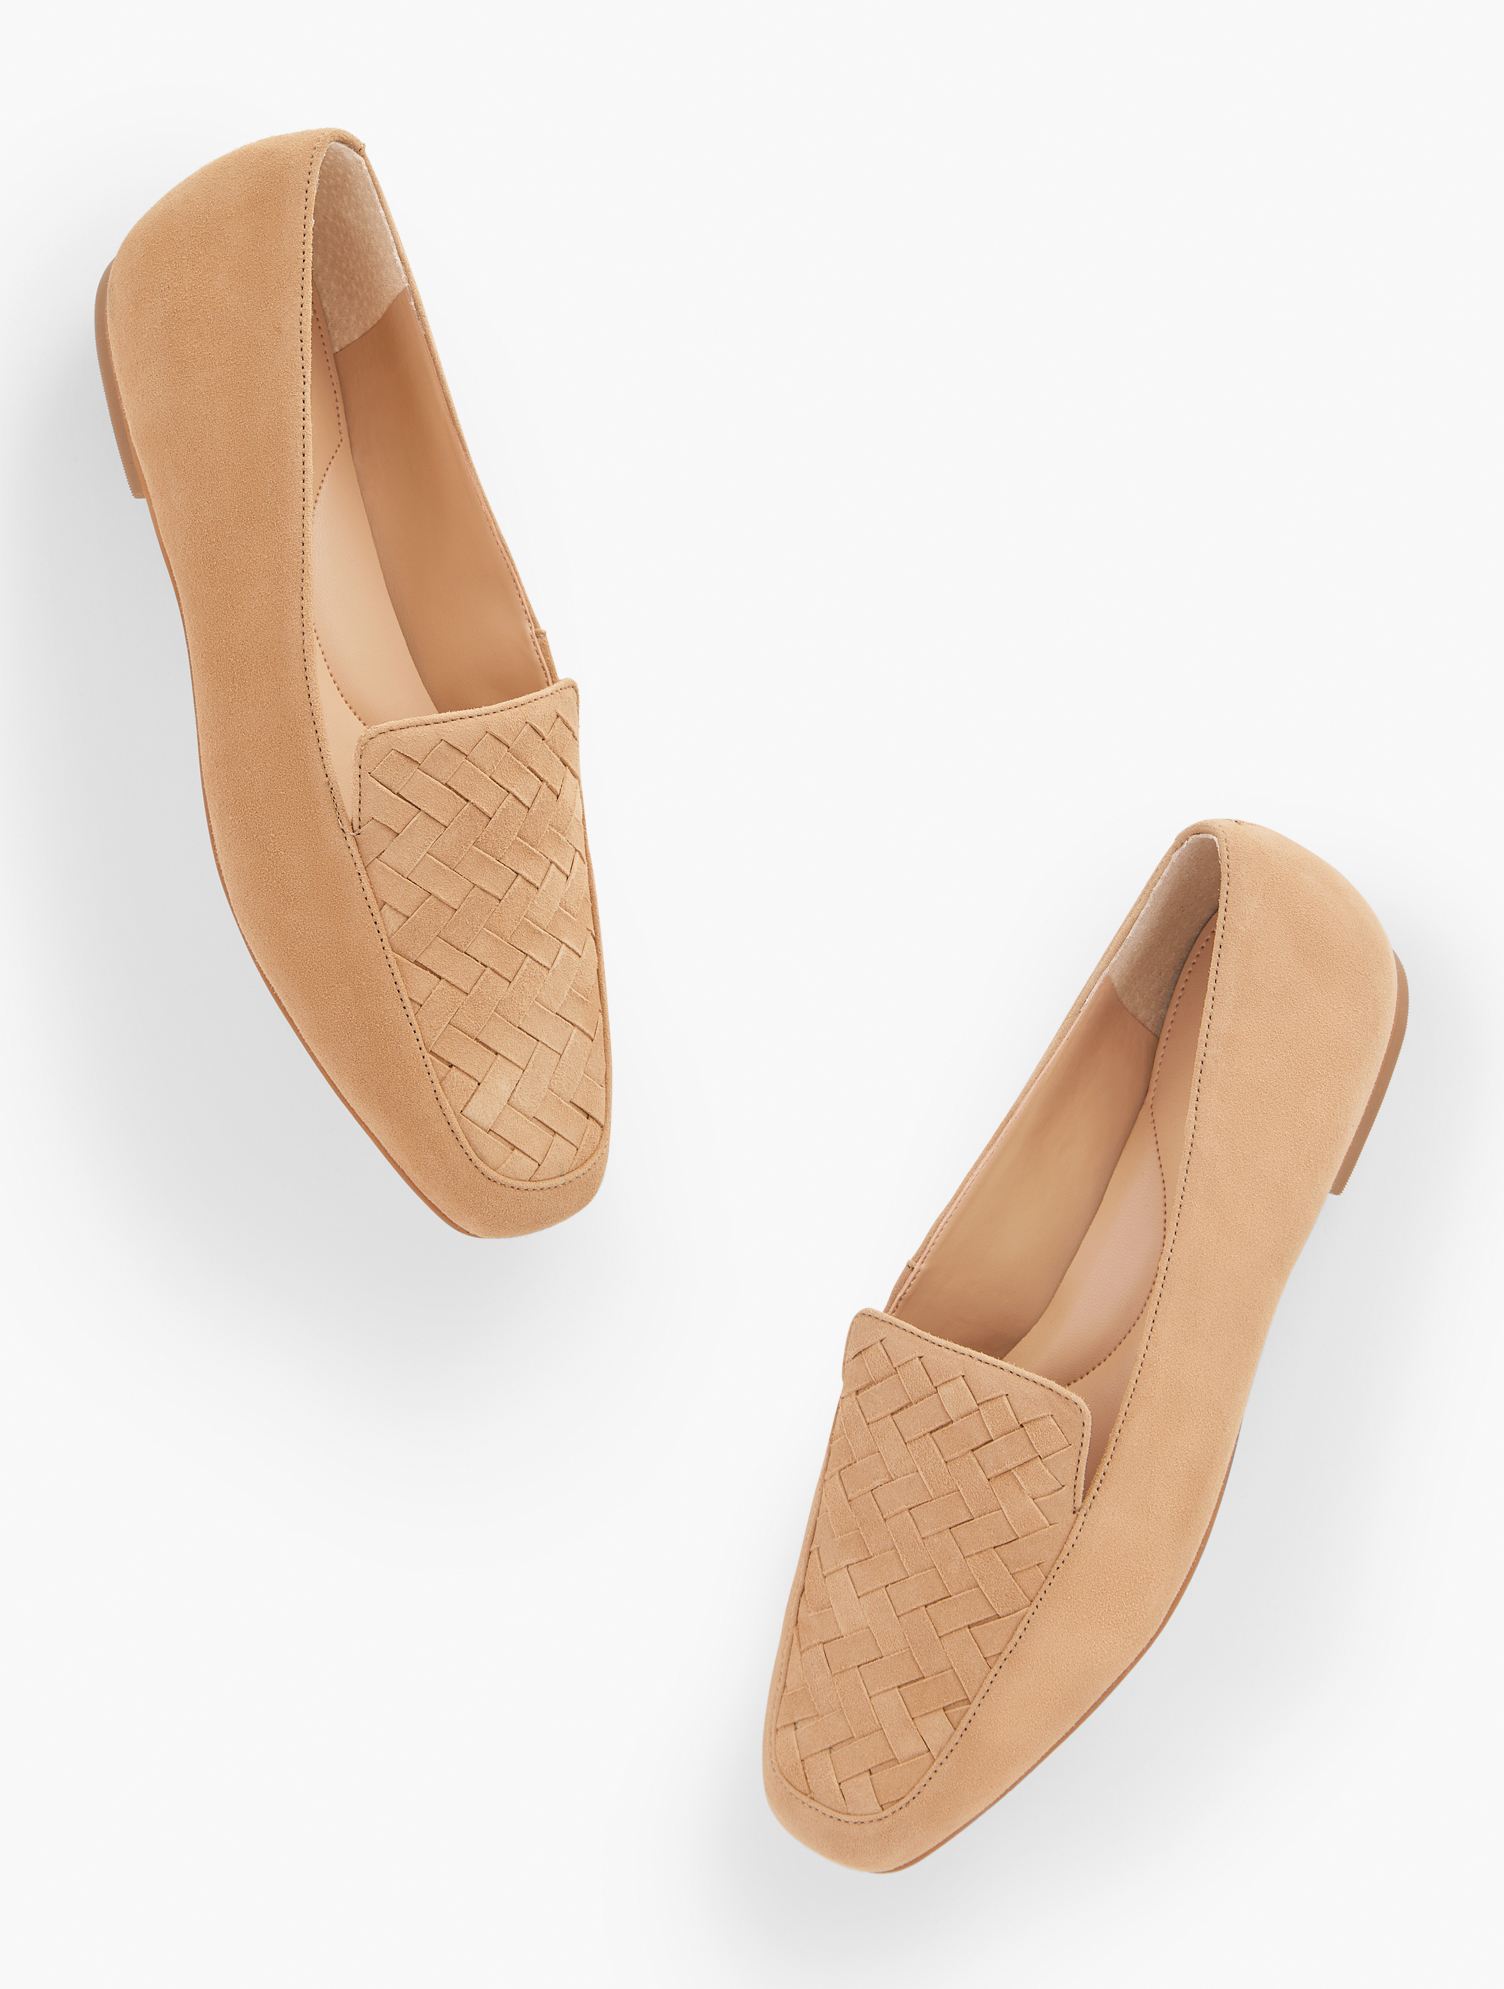 Talbots Stella Woven Suede Loafers - Light Toffee - 10m